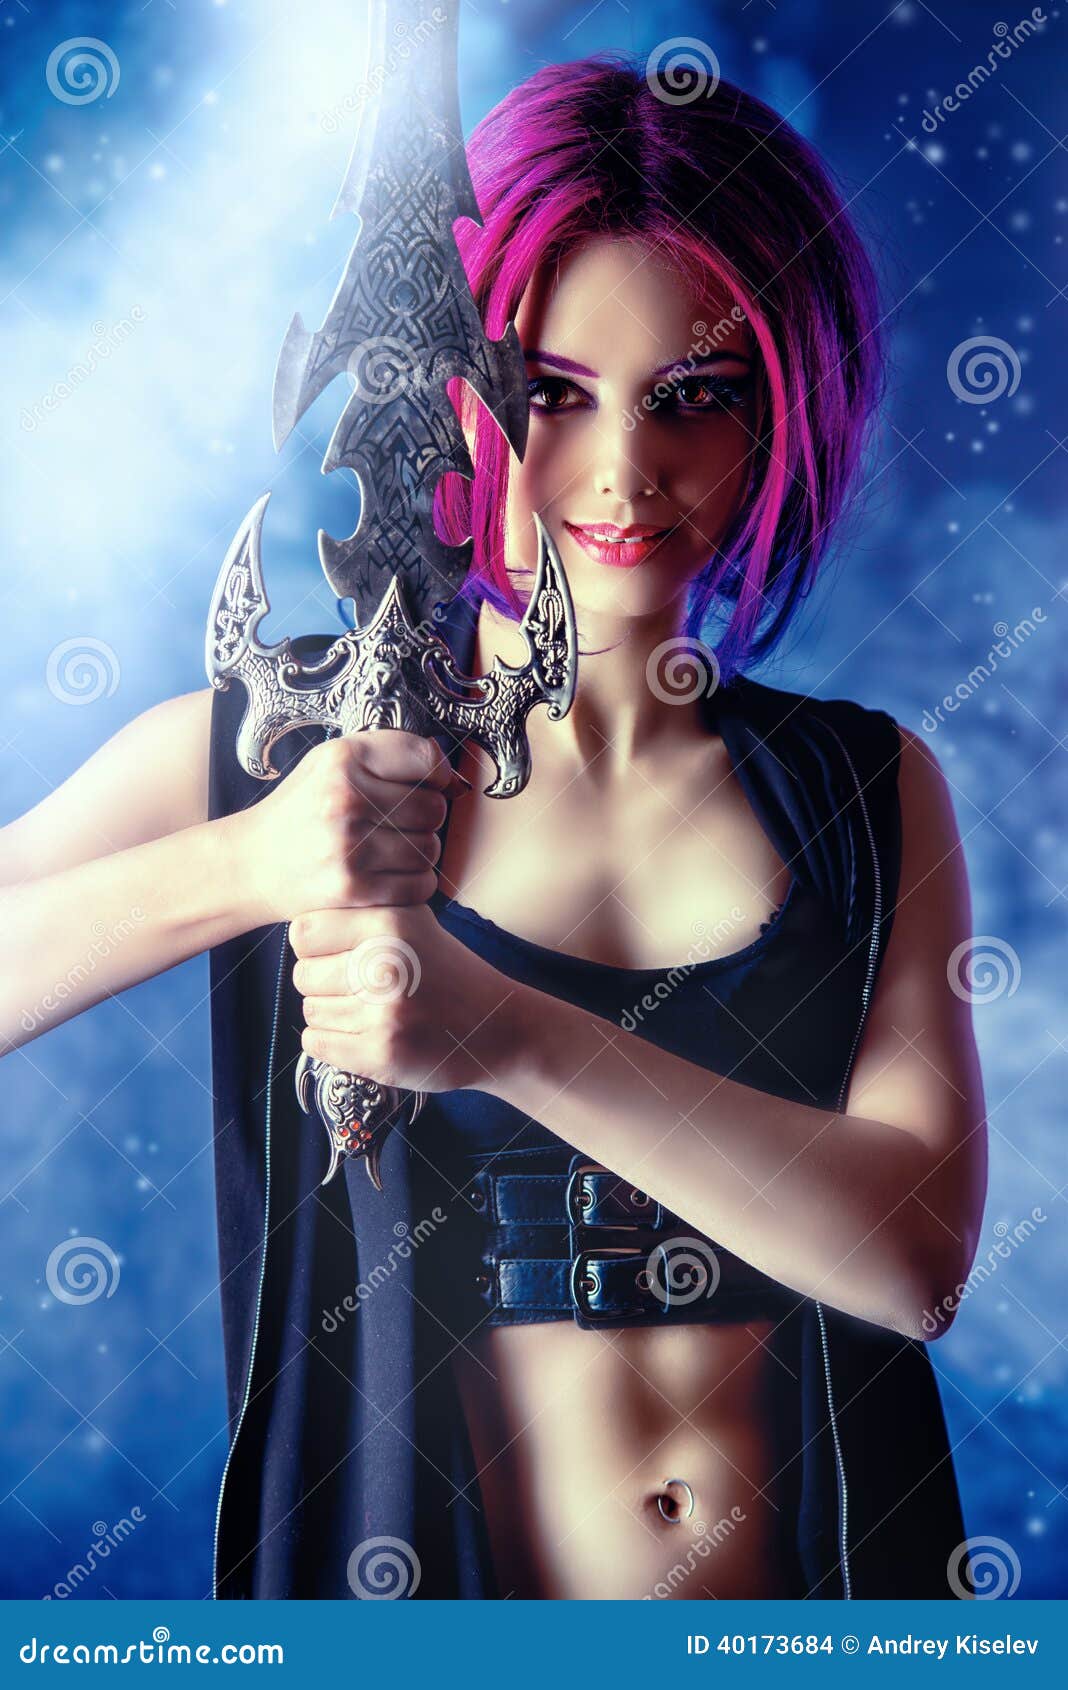 A Brave Anime Warrior Girl In Front Of The Next Quest, Ancient City, Ai  Generated Image Stock Photo, Picture And Royalty Free Image. Image  202187055.